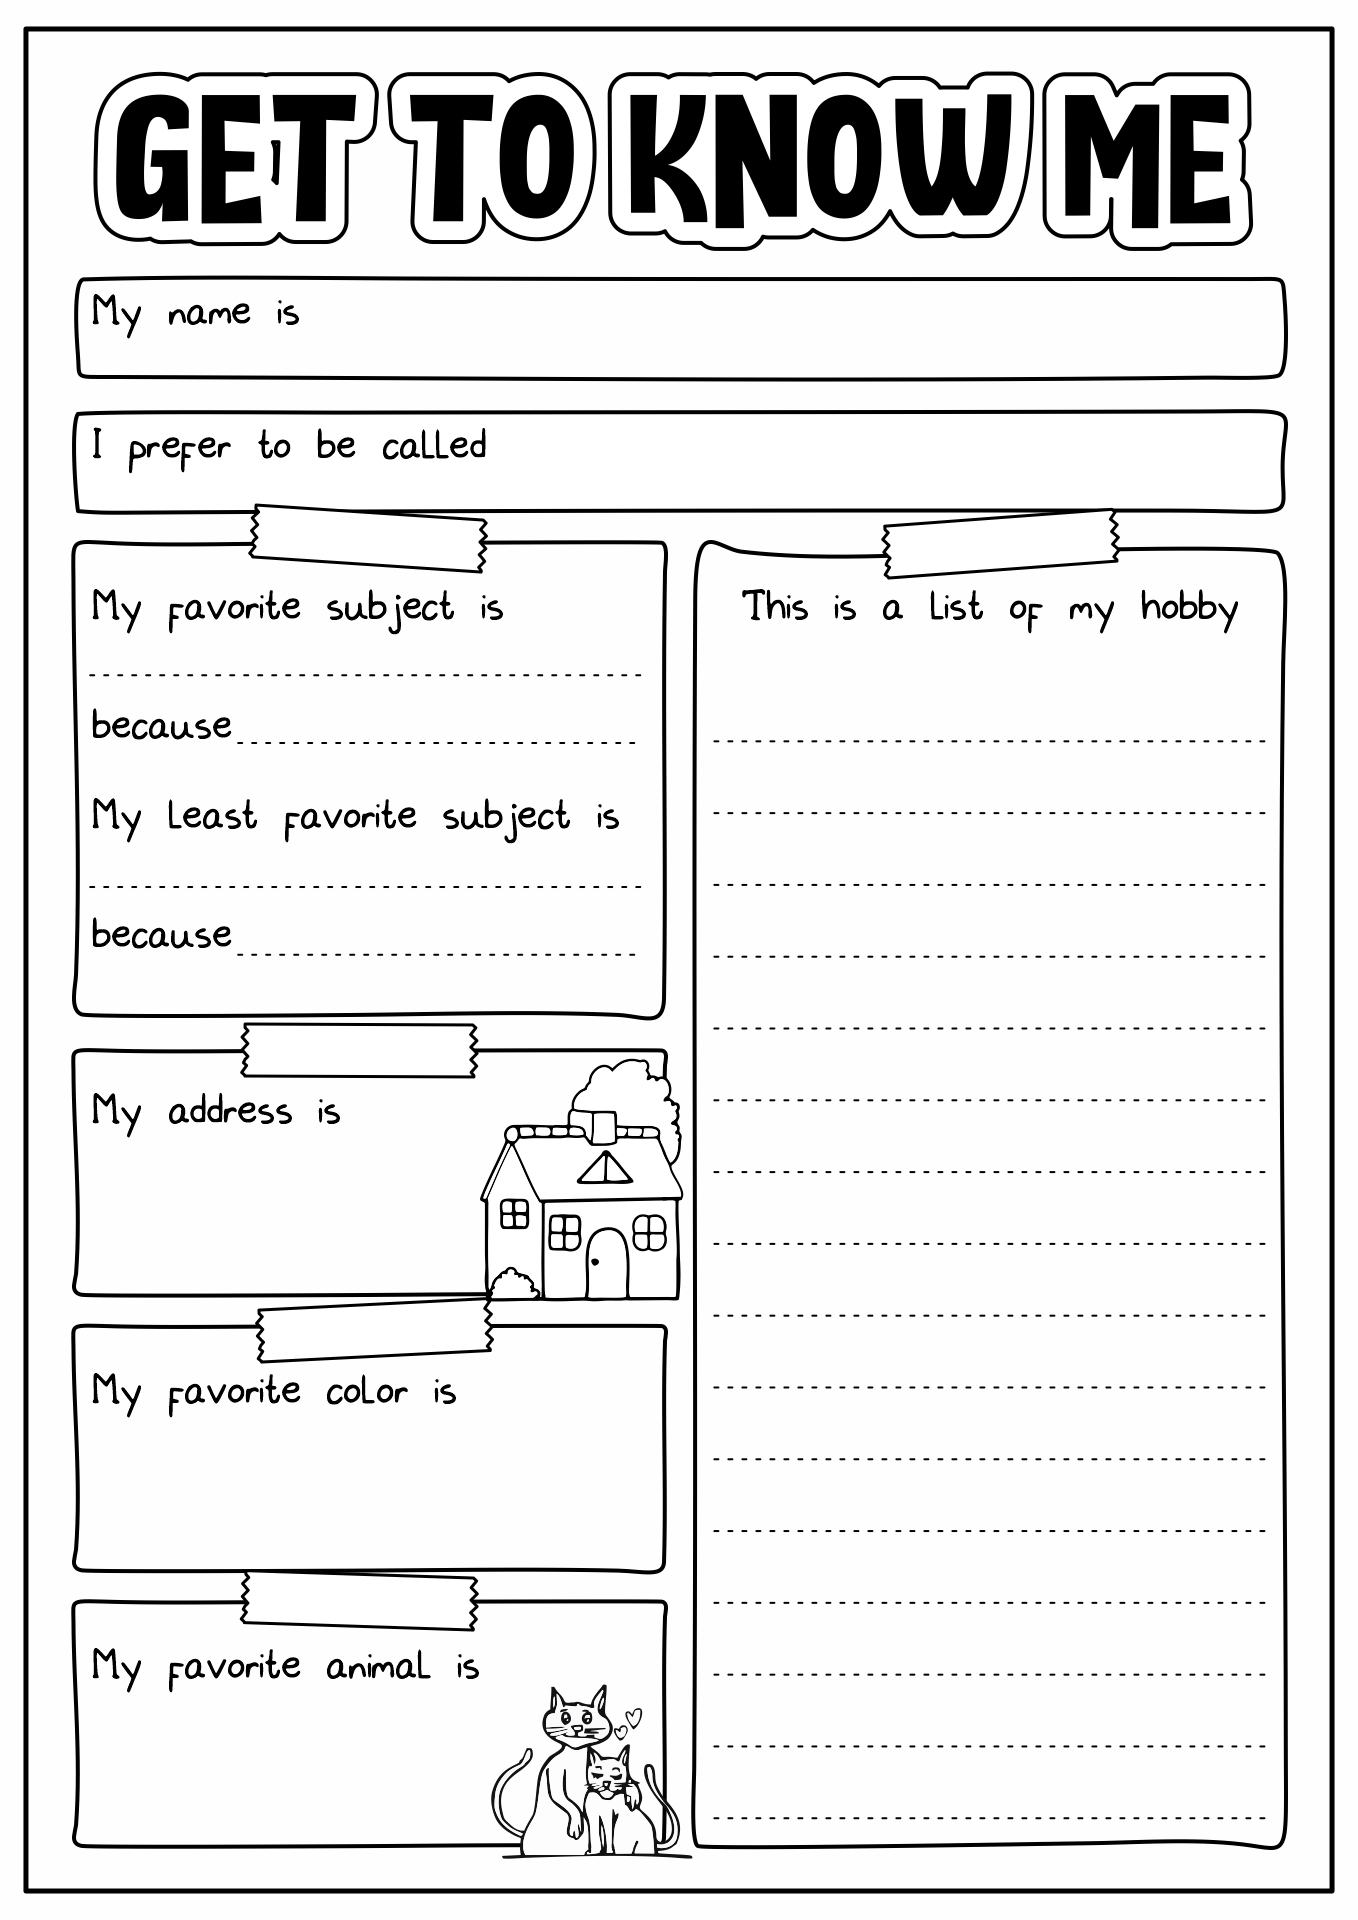 14 Best Images Of All About Me Printable Worksheet For Adults All 